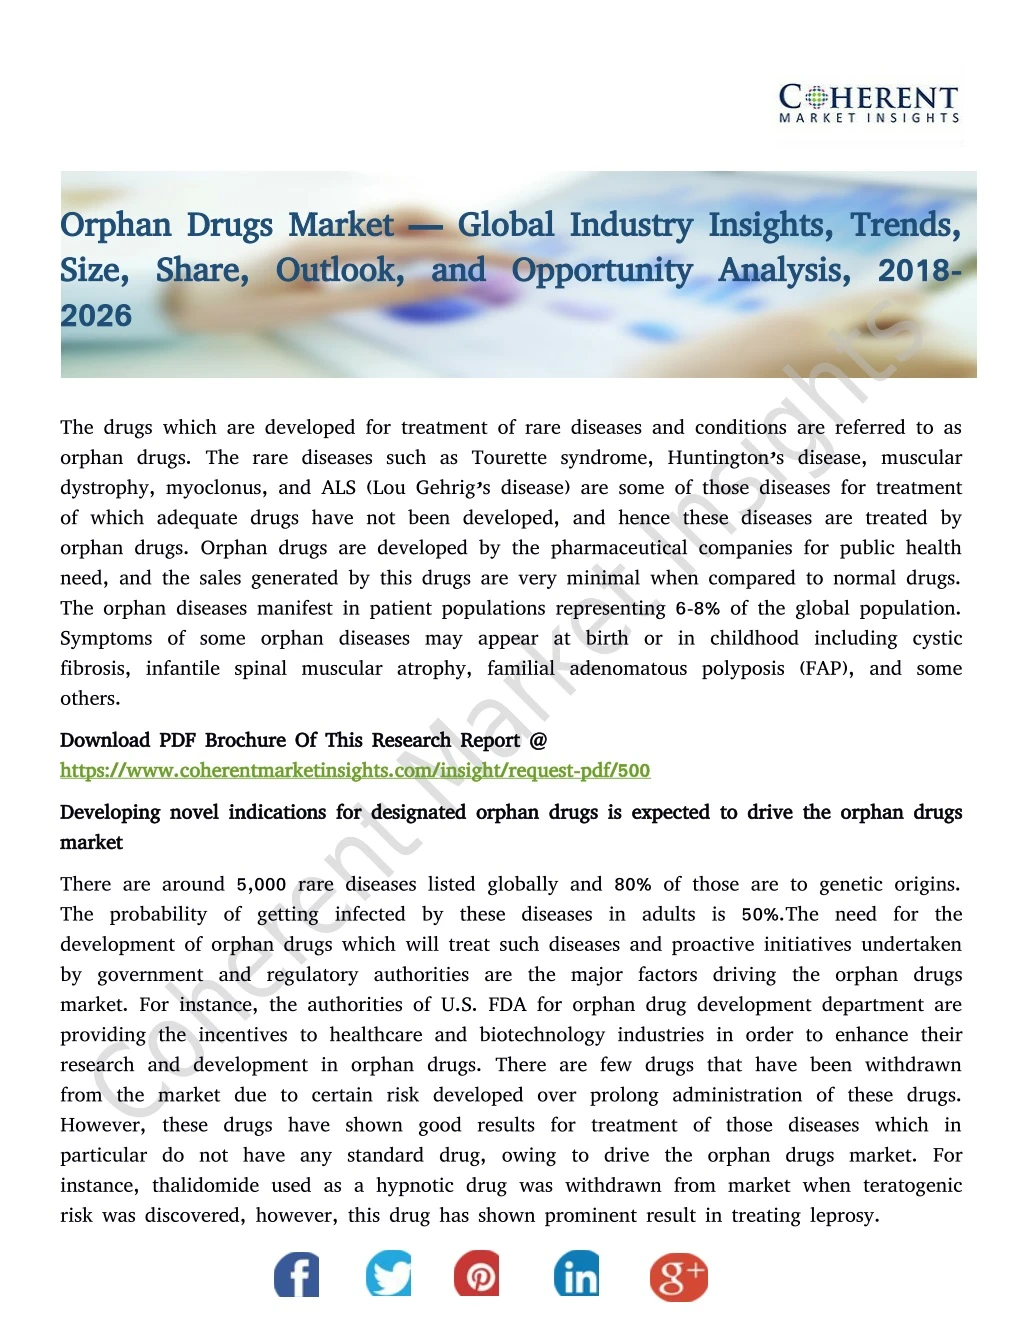 orphan drugs market global industry insights